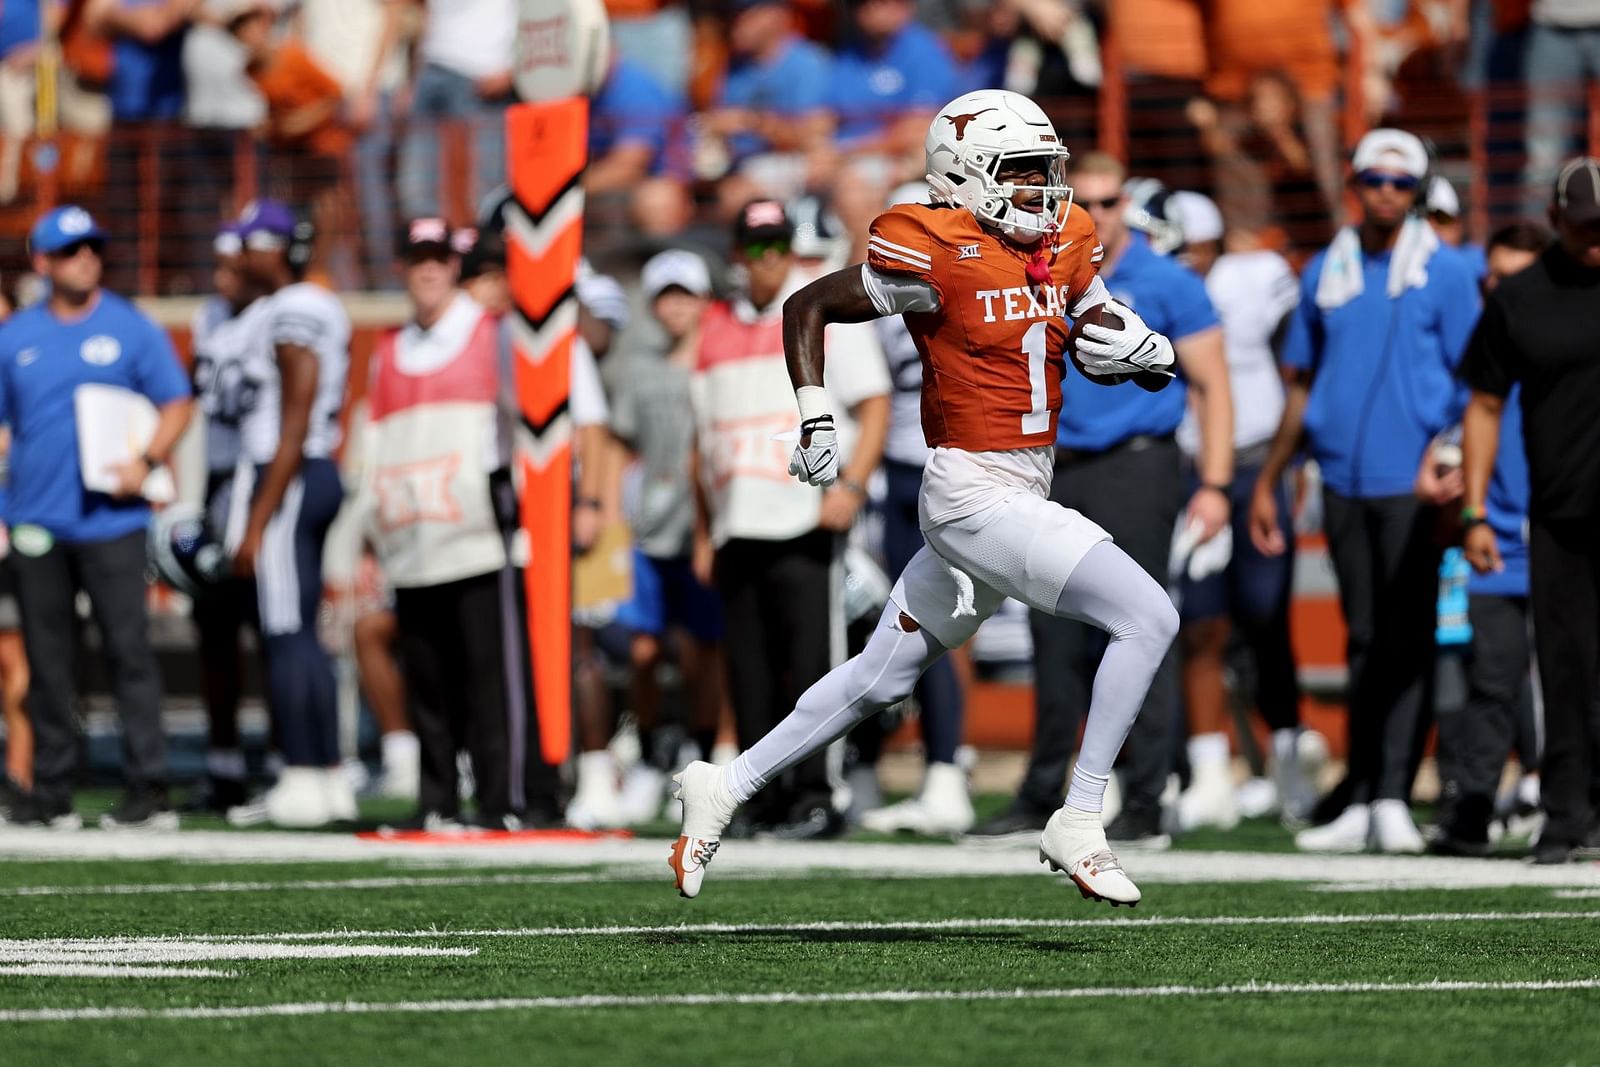 Xavier Worthy NFL draft projection 5 landing spots for the Texas WR ft